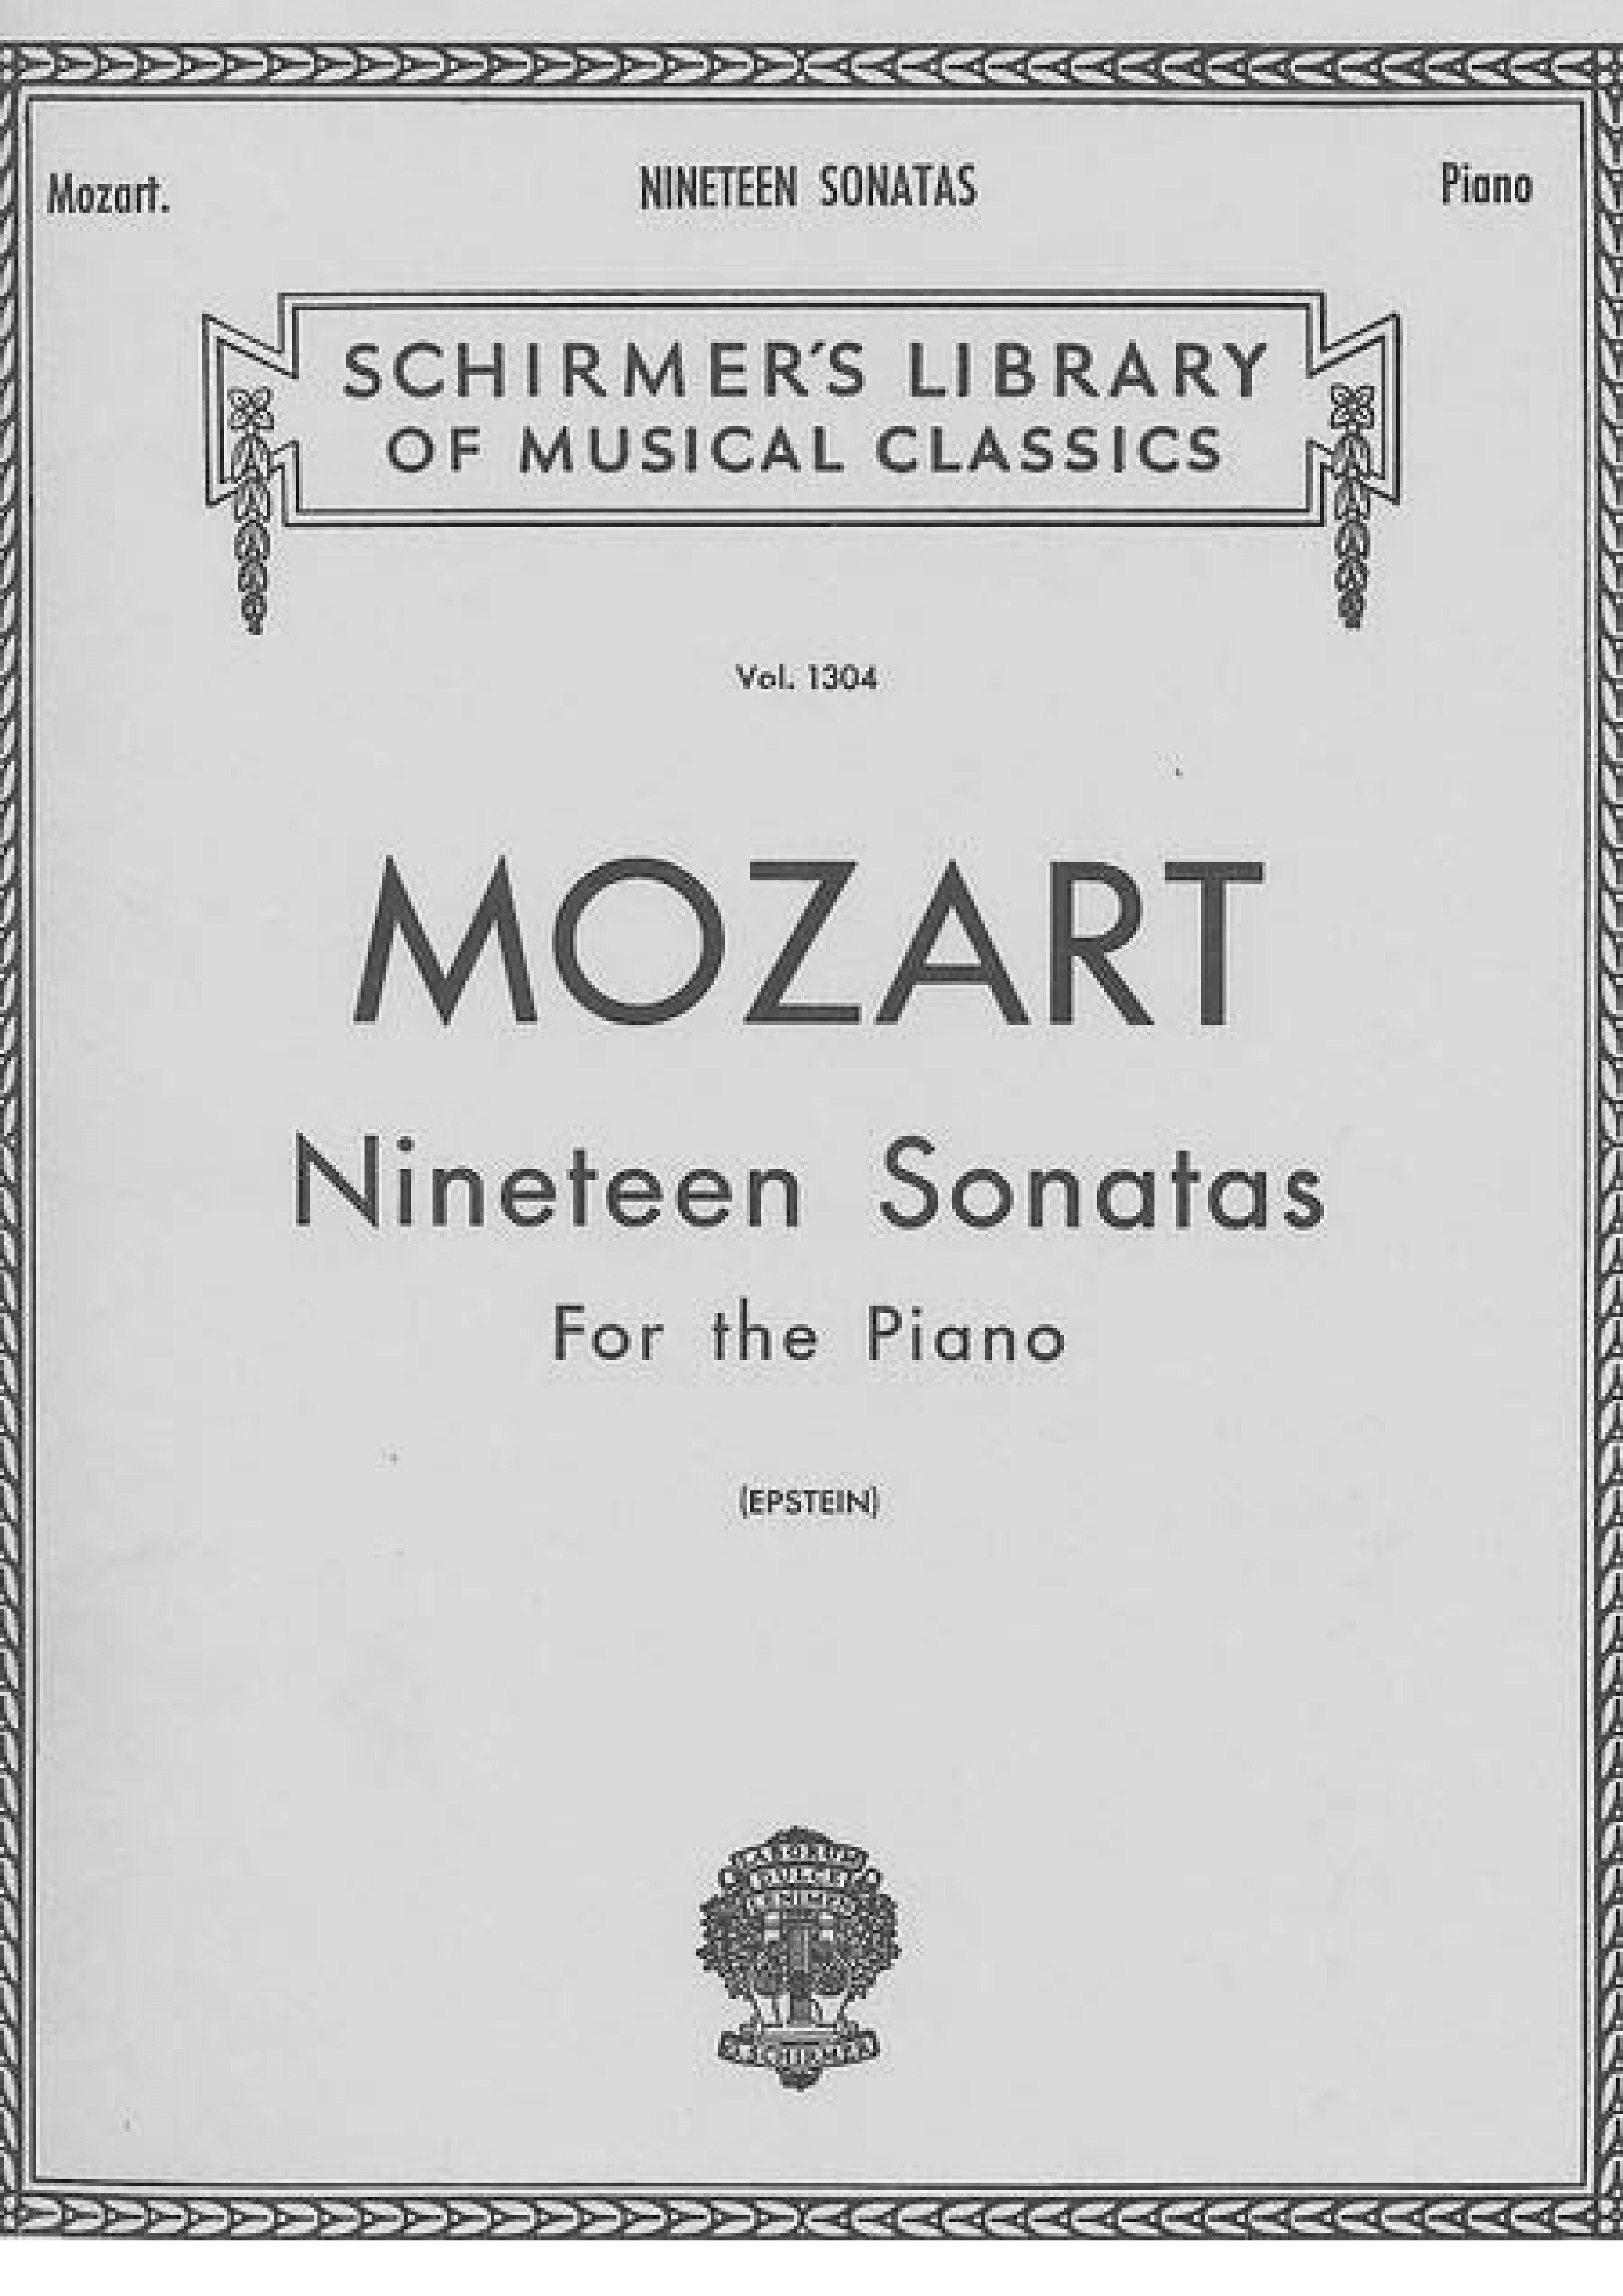 19 Sonatas For The Piano - 313 Pages Score